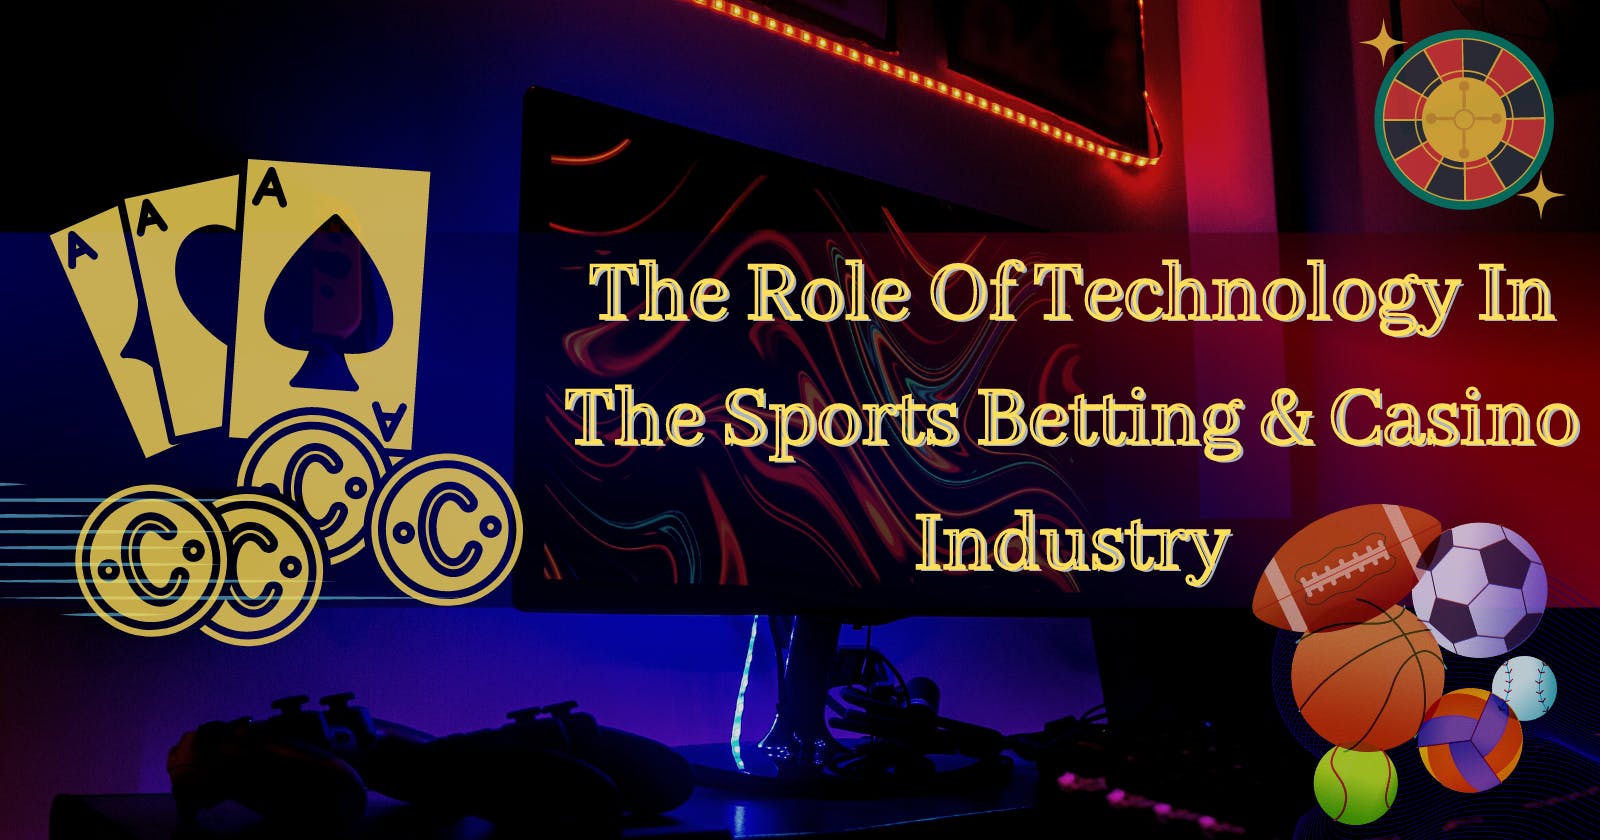 The Role Of Technology In The Sports Betting & Casino Industry